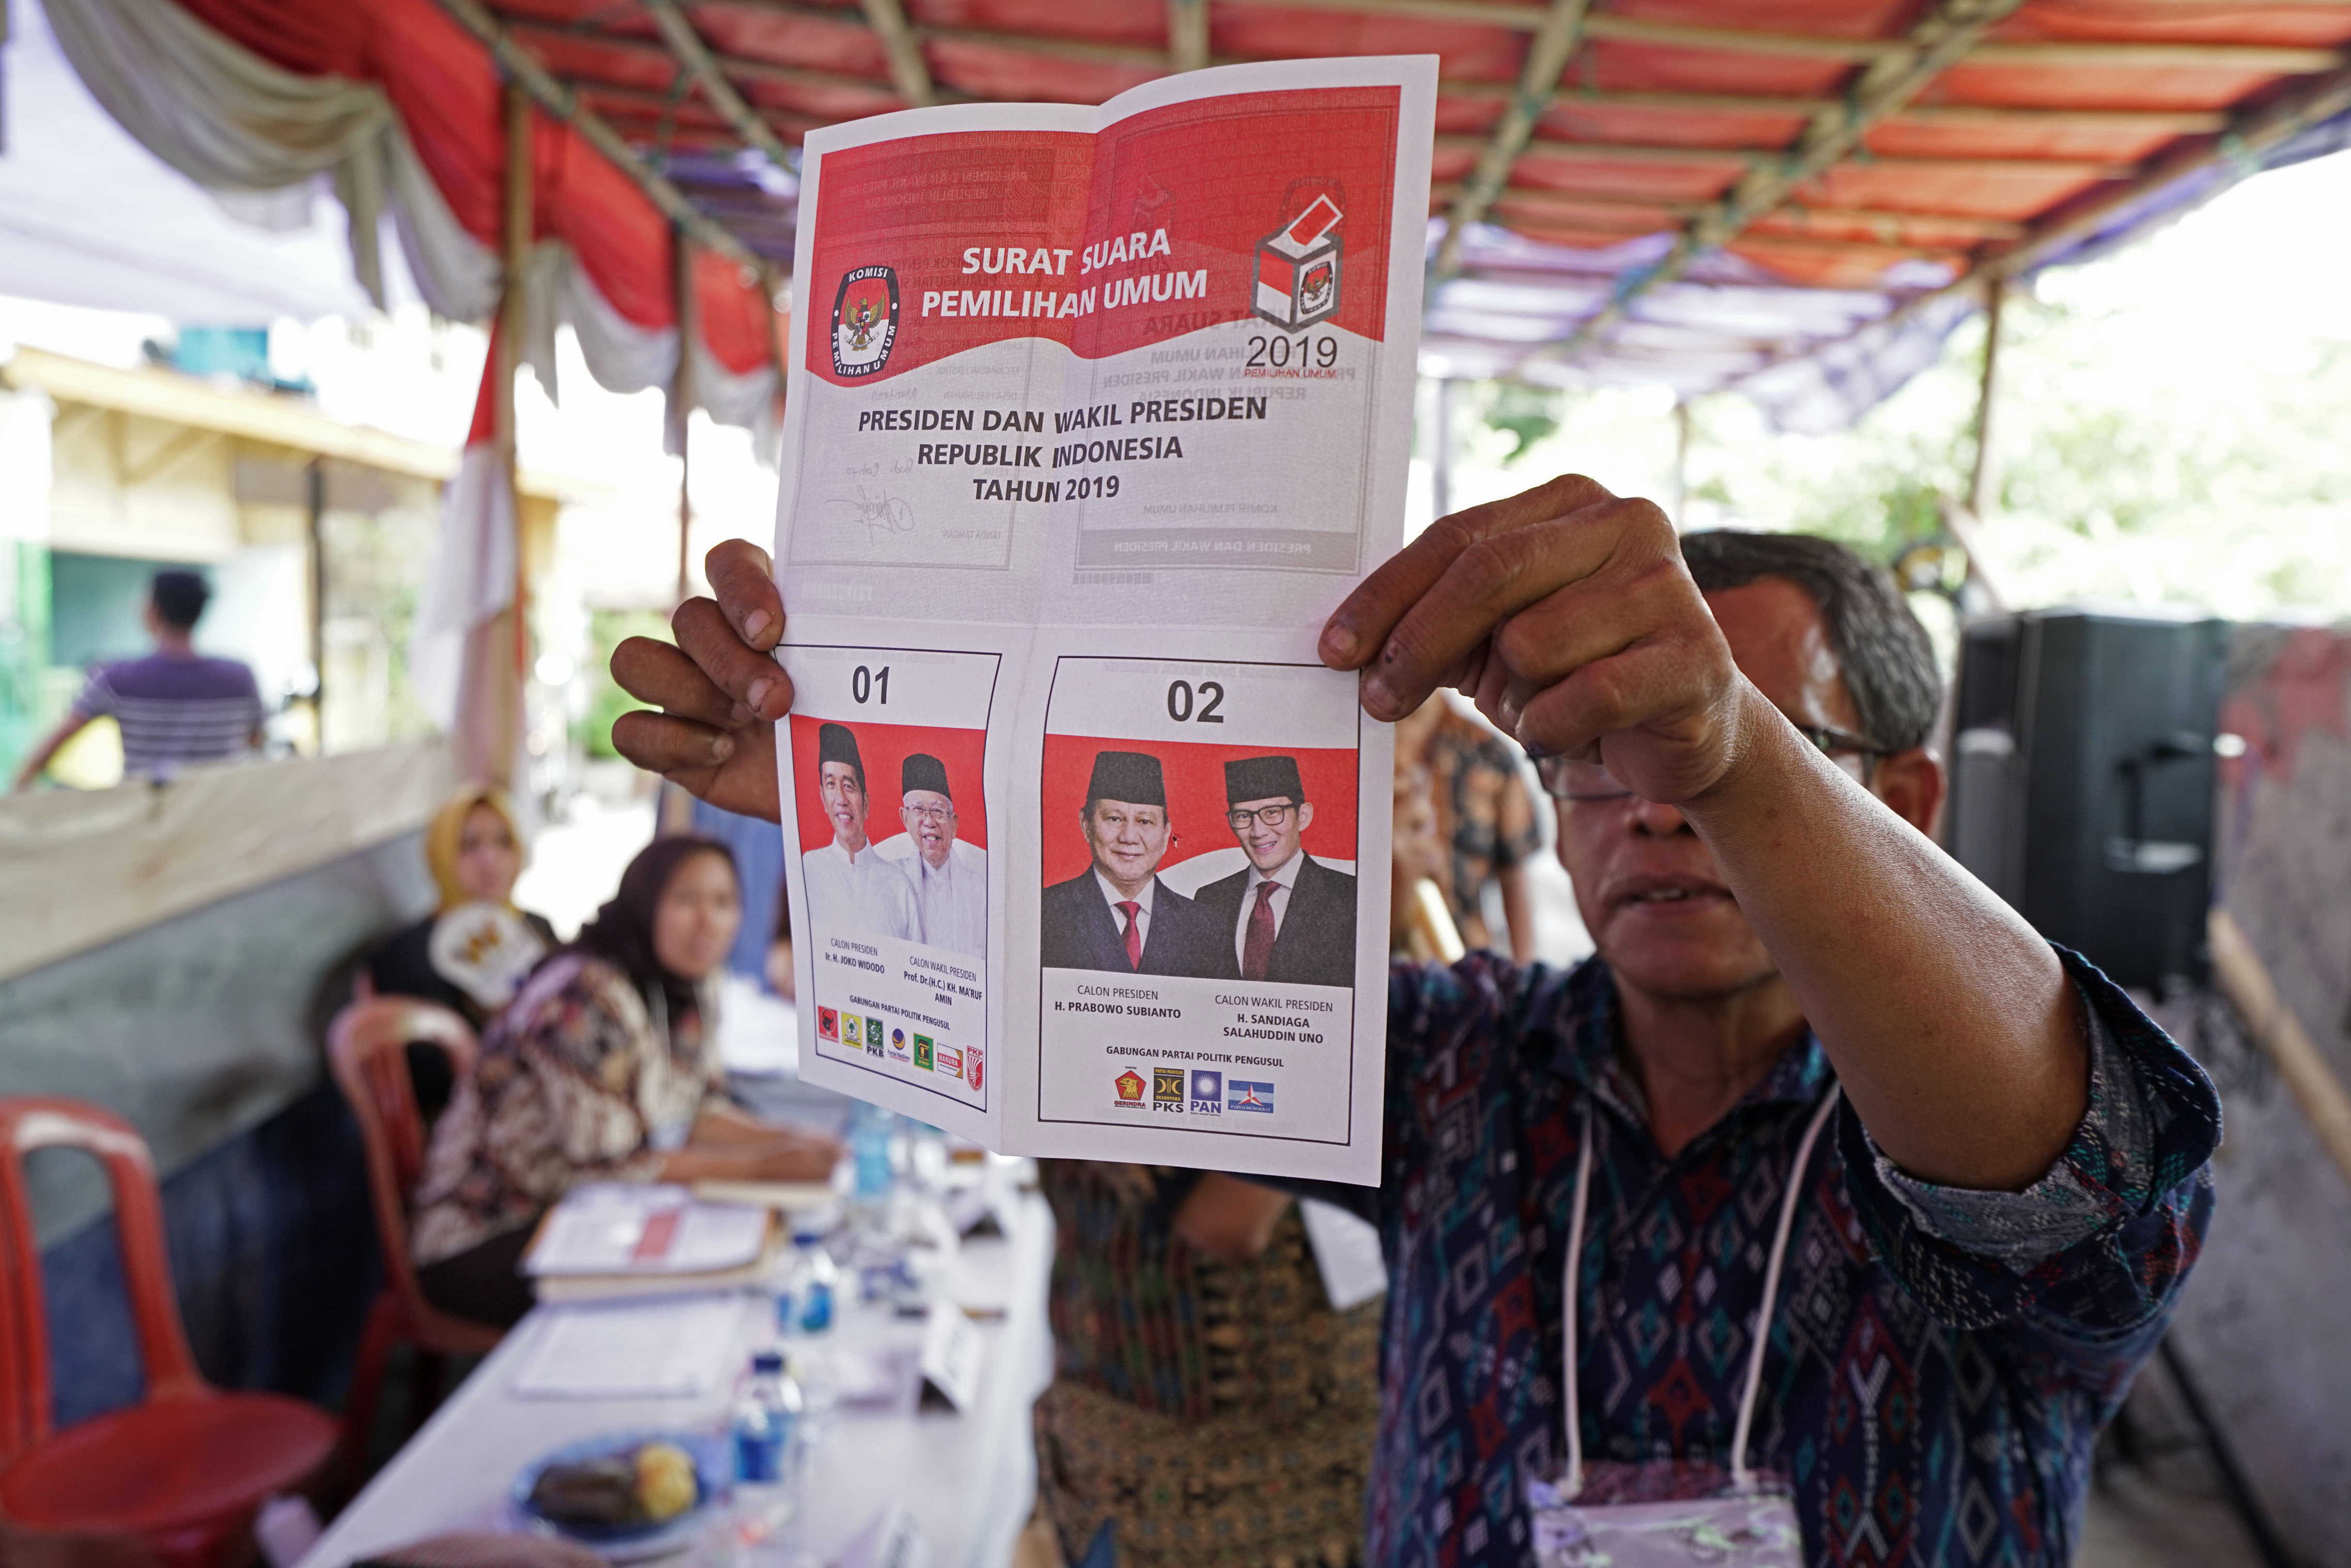 An election official holds a ballot during the counting for the general elections at a polling station in Jakarta, Indonesia, on Wednesday, April 17, 2019. Indonesians have voted in the world’s biggest single-day election, with unofficial tallies putting President Joko Widodo ahead with 55 percent with around 38 percent of votes counted.